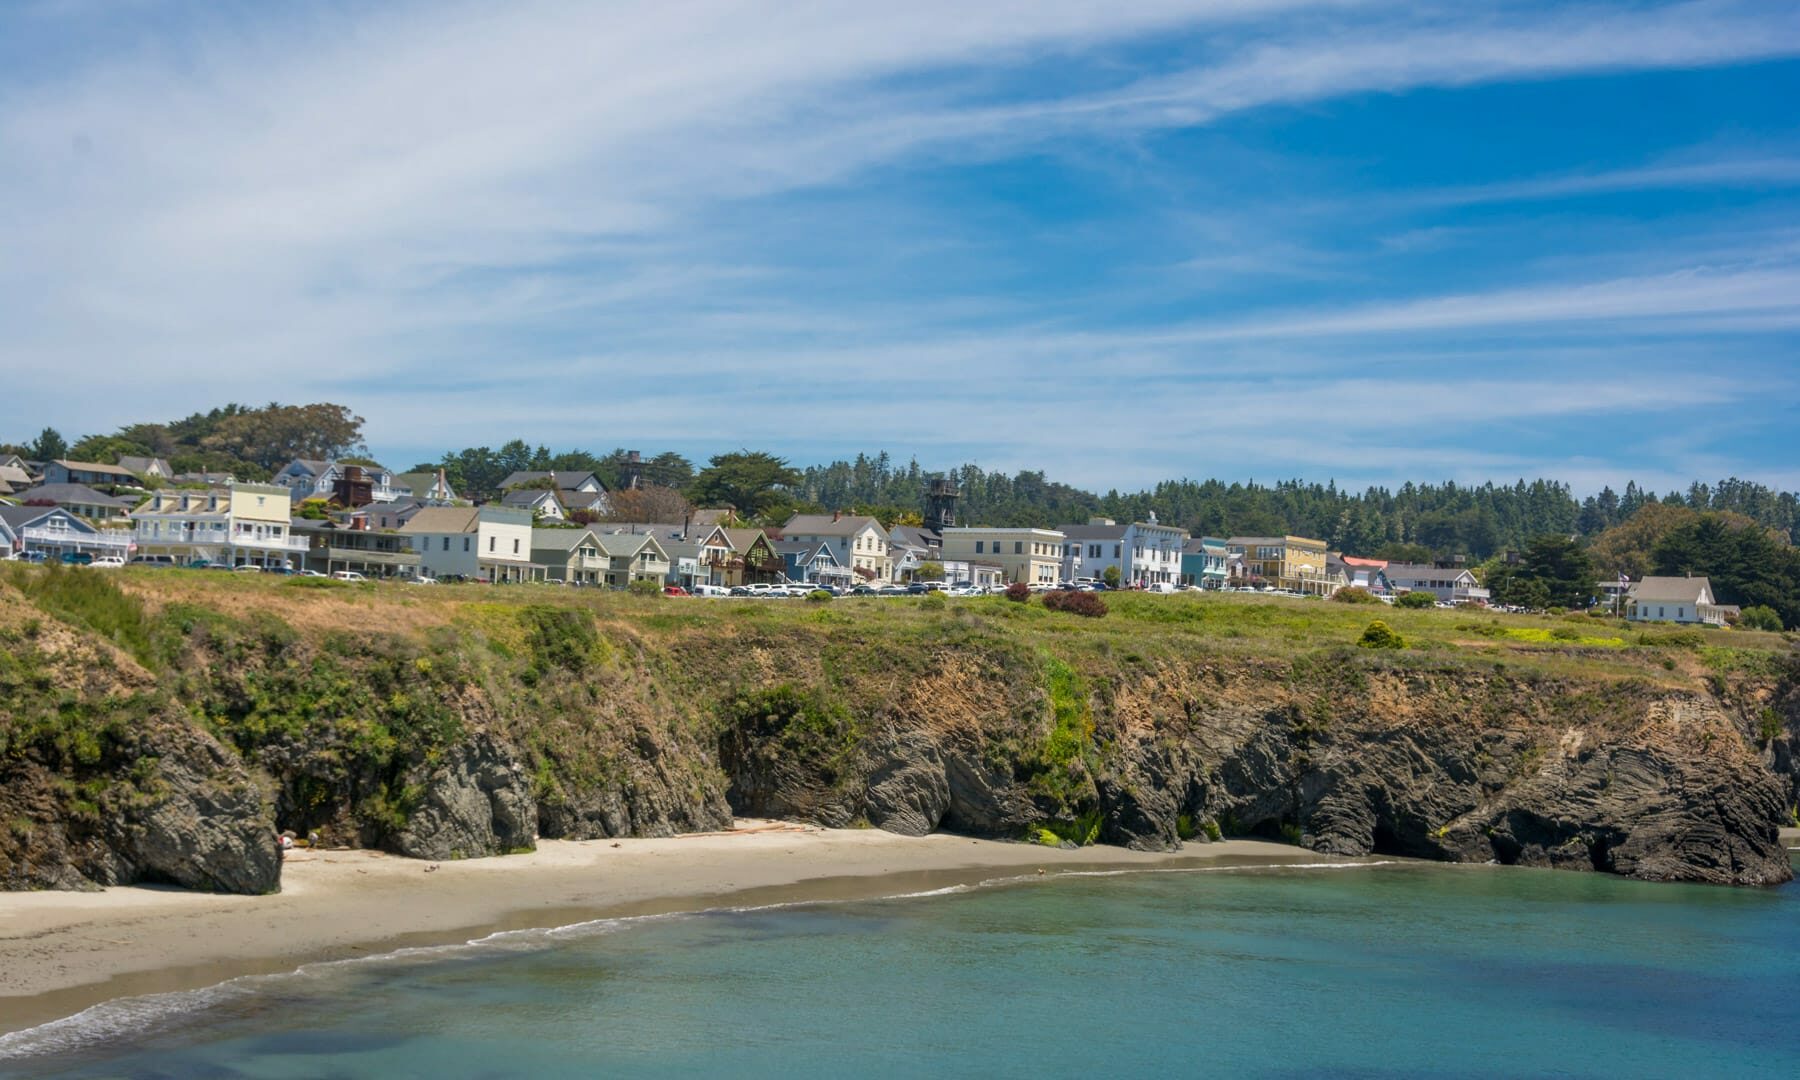 The Best Boutique Hotels in Mendocino, California